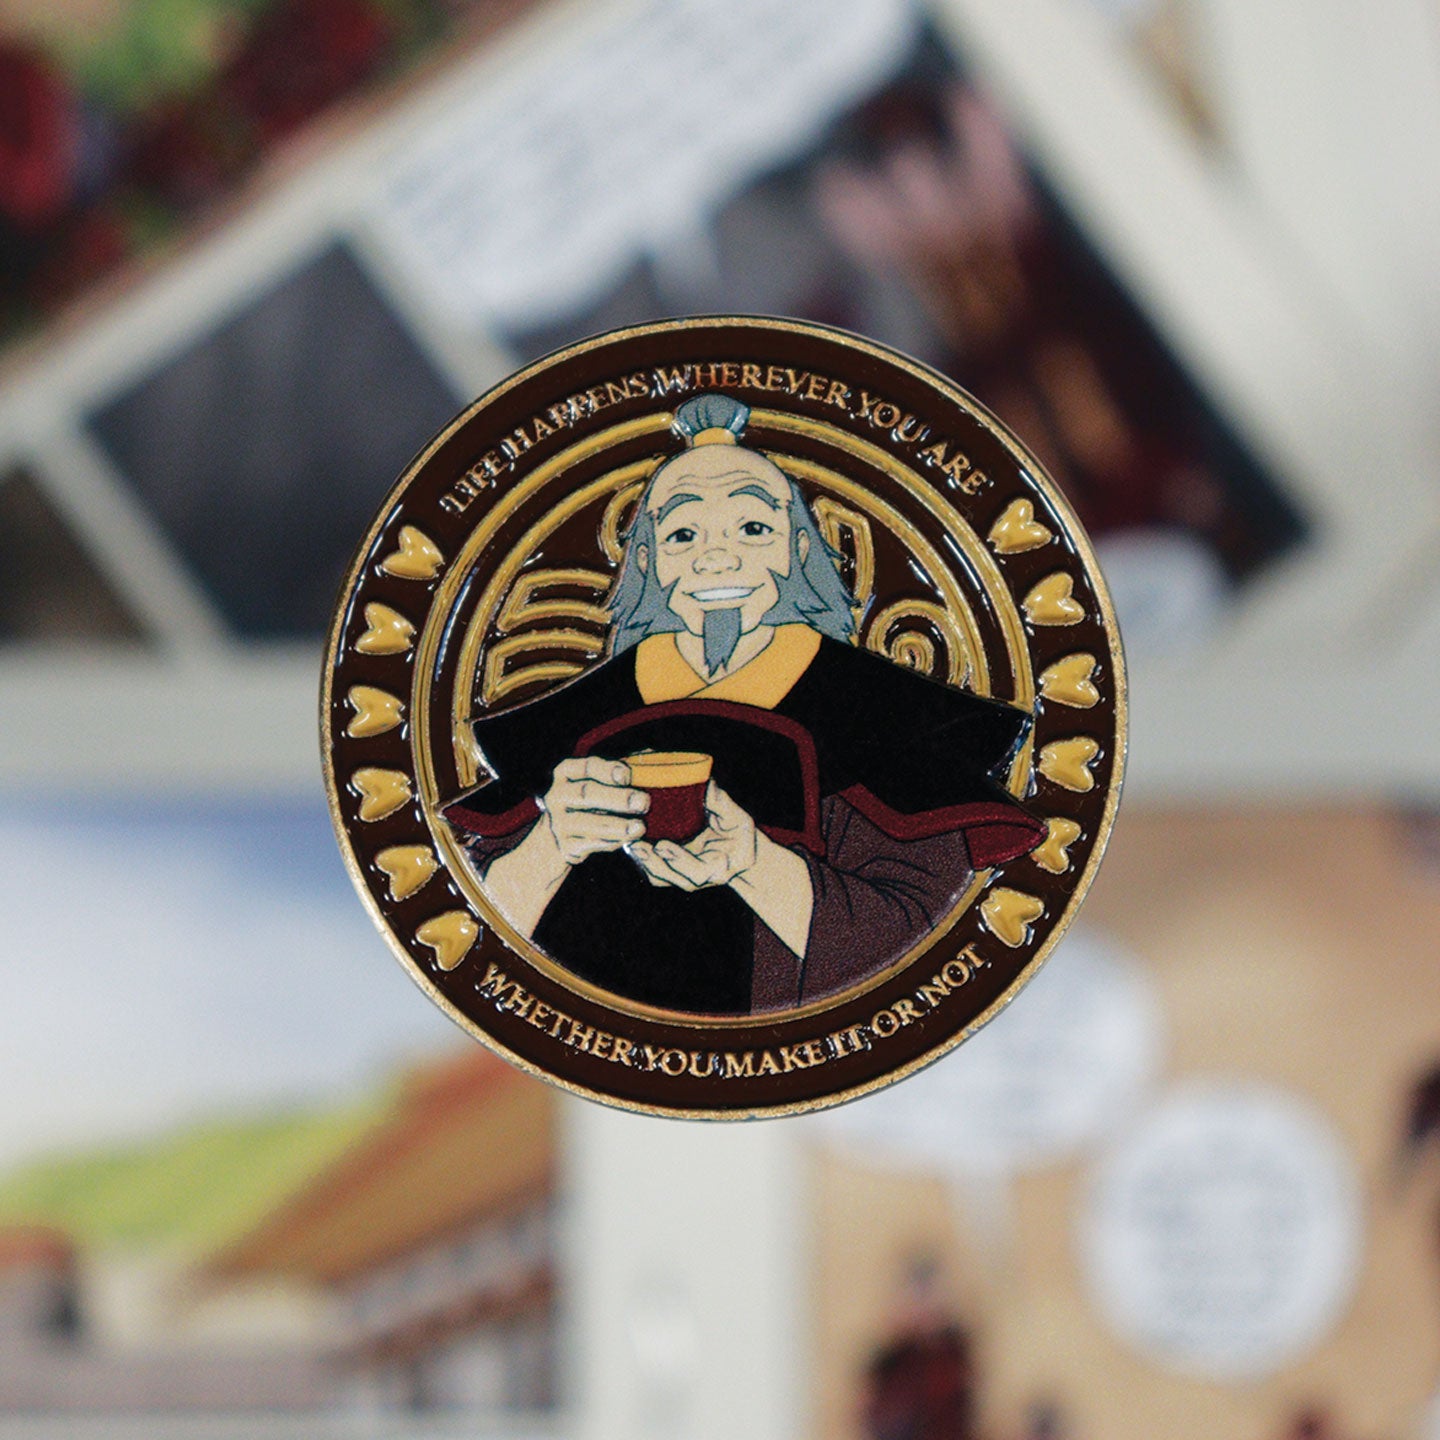 Avatar: The Last Airbender Limited Edition Collectible Coin